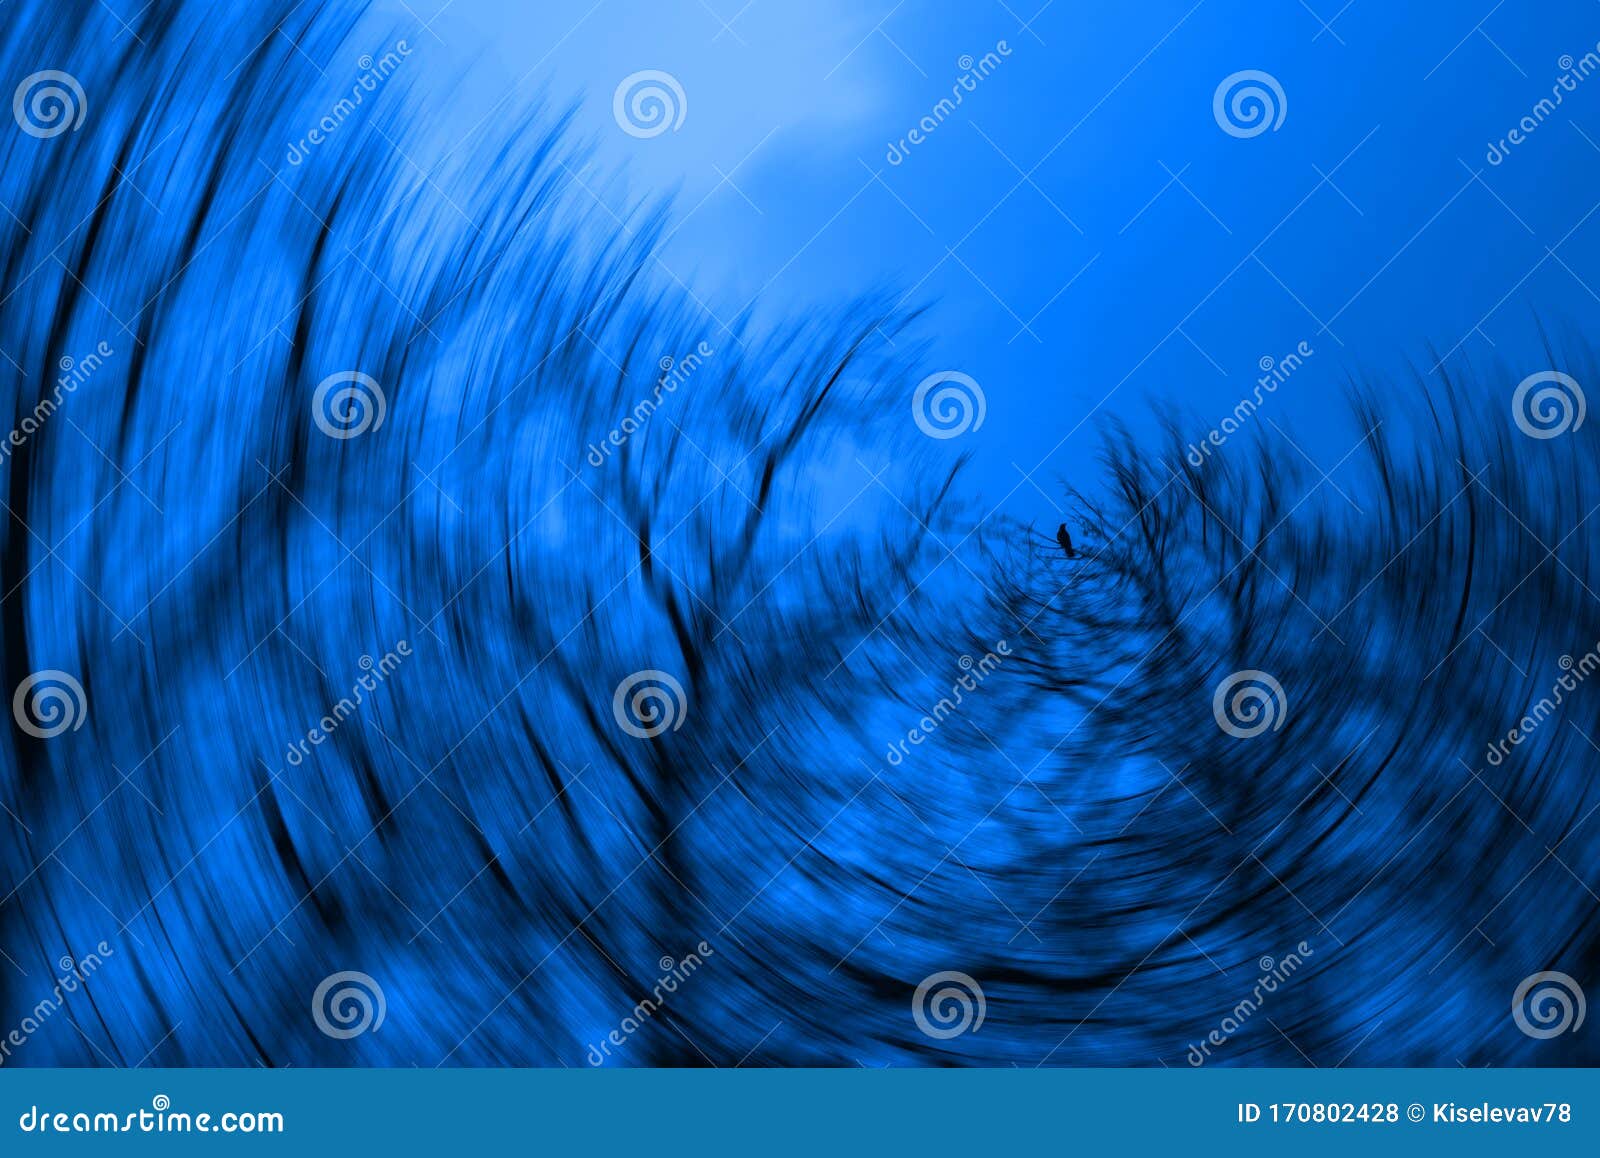 abstract tree silhouettes with radial blur. concept of a nightmare